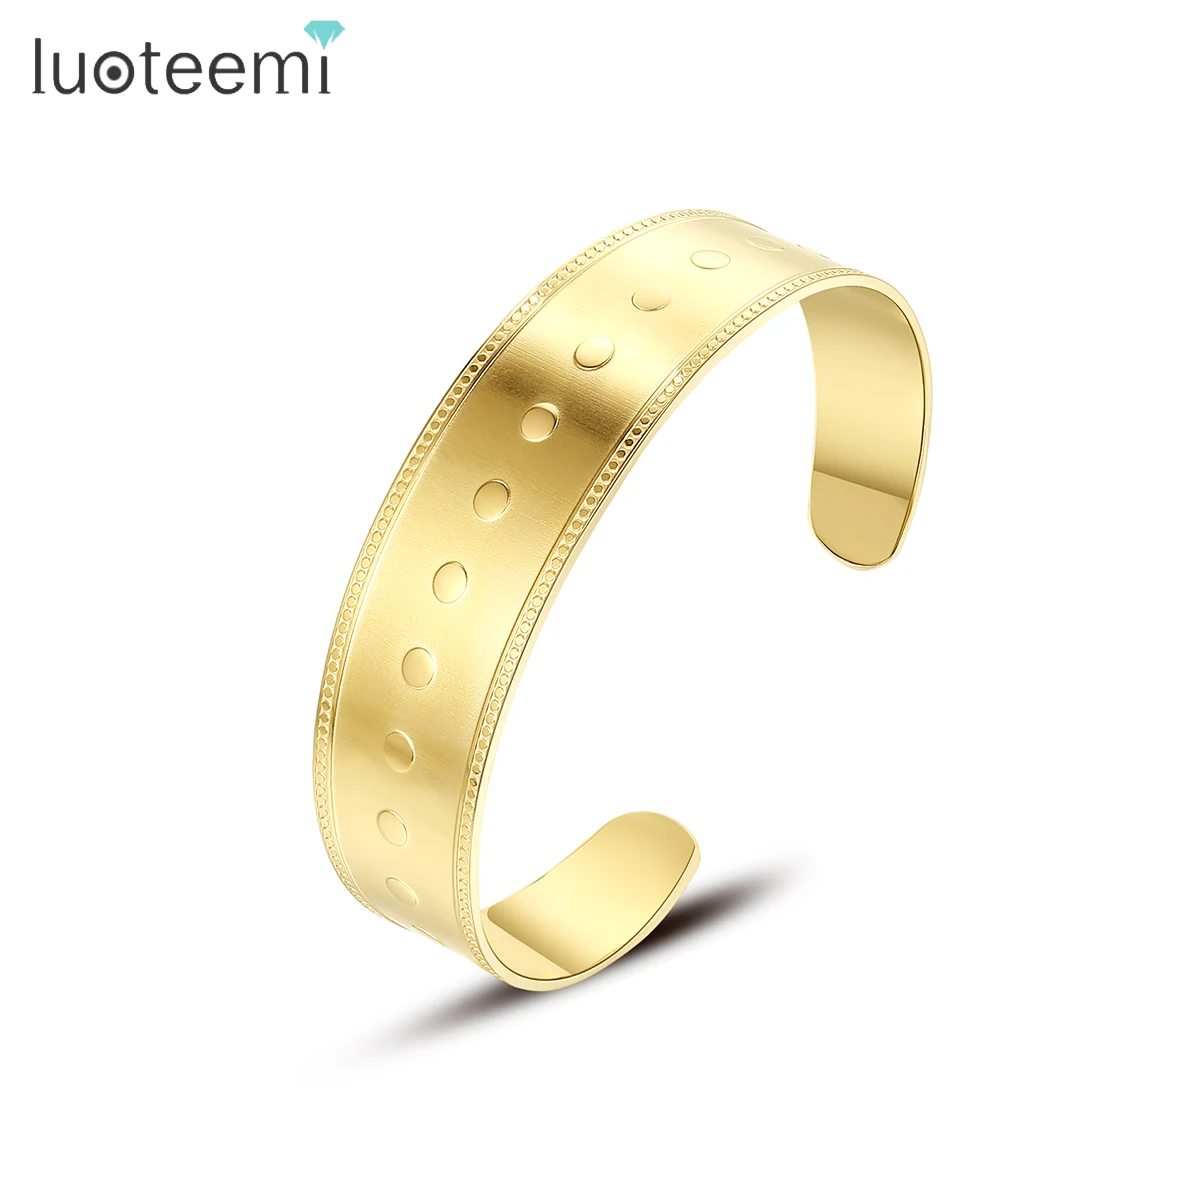 

SP-LAM Wholesale Designer Charm Stainless Steel Jewelry Woman Indian Bracelet Hot Sale Wide Cuff Bangle